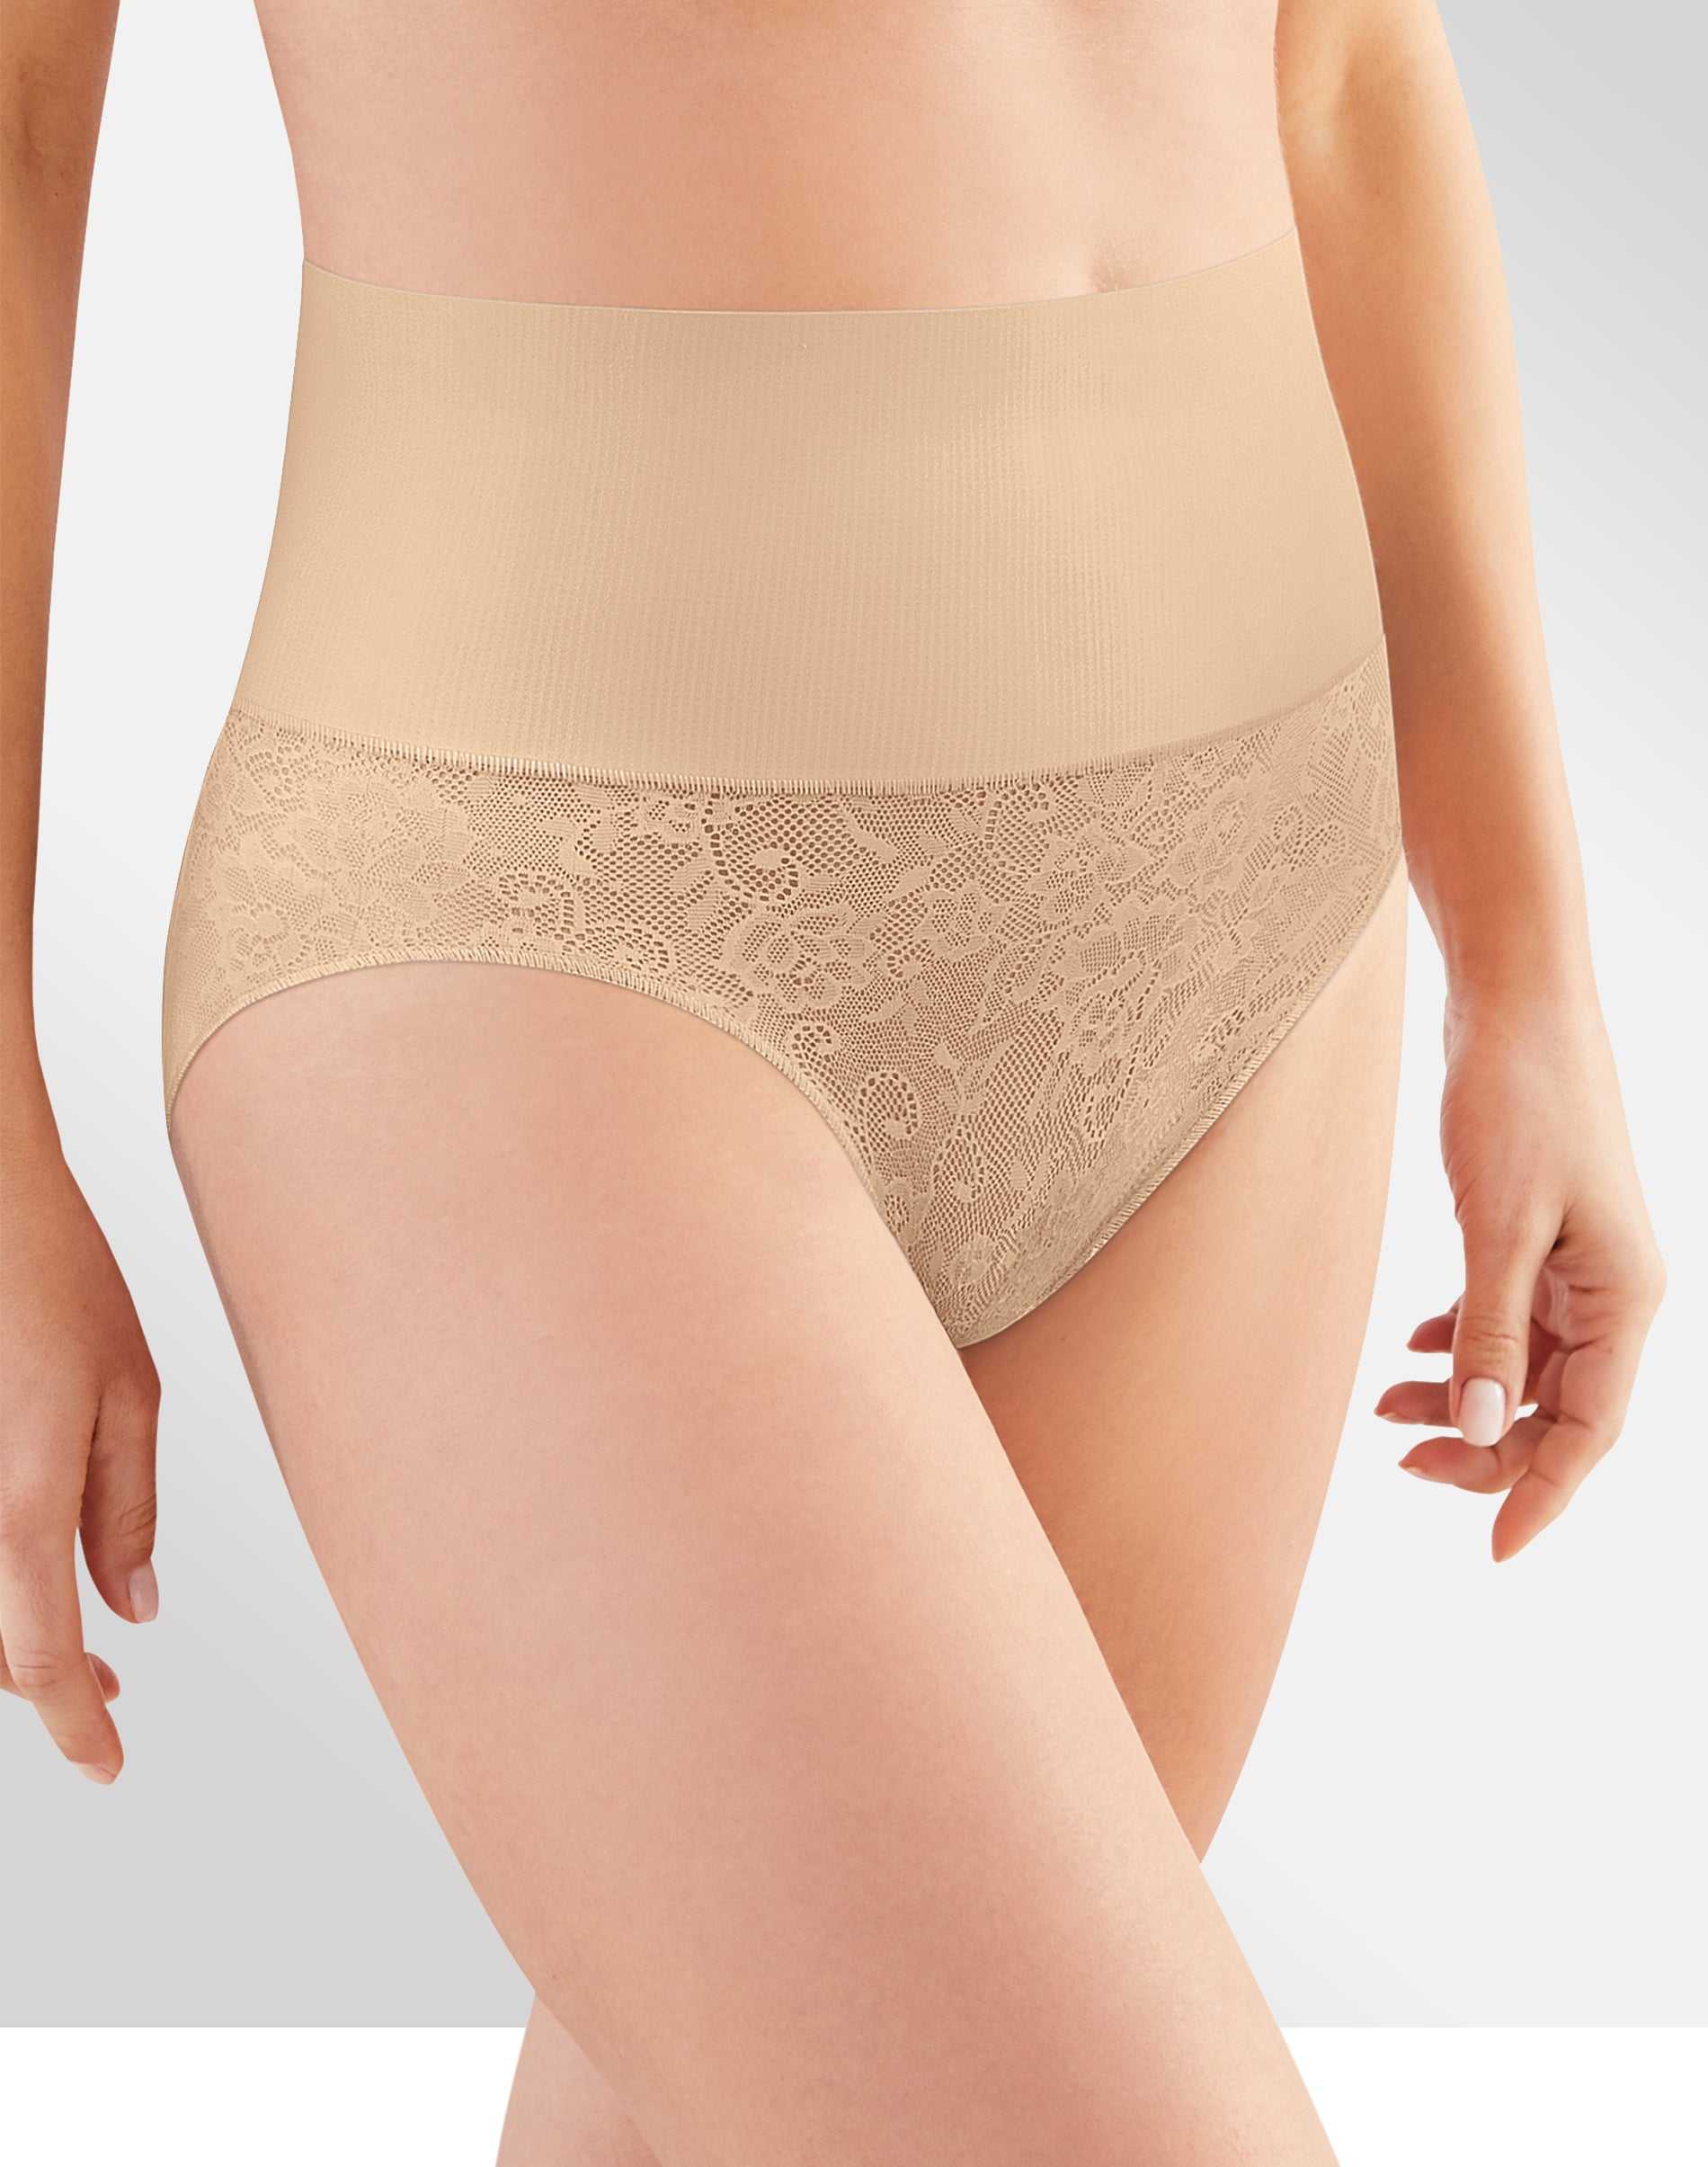 Mesh Shapewear Panty for Women - Nude High-Waisted With